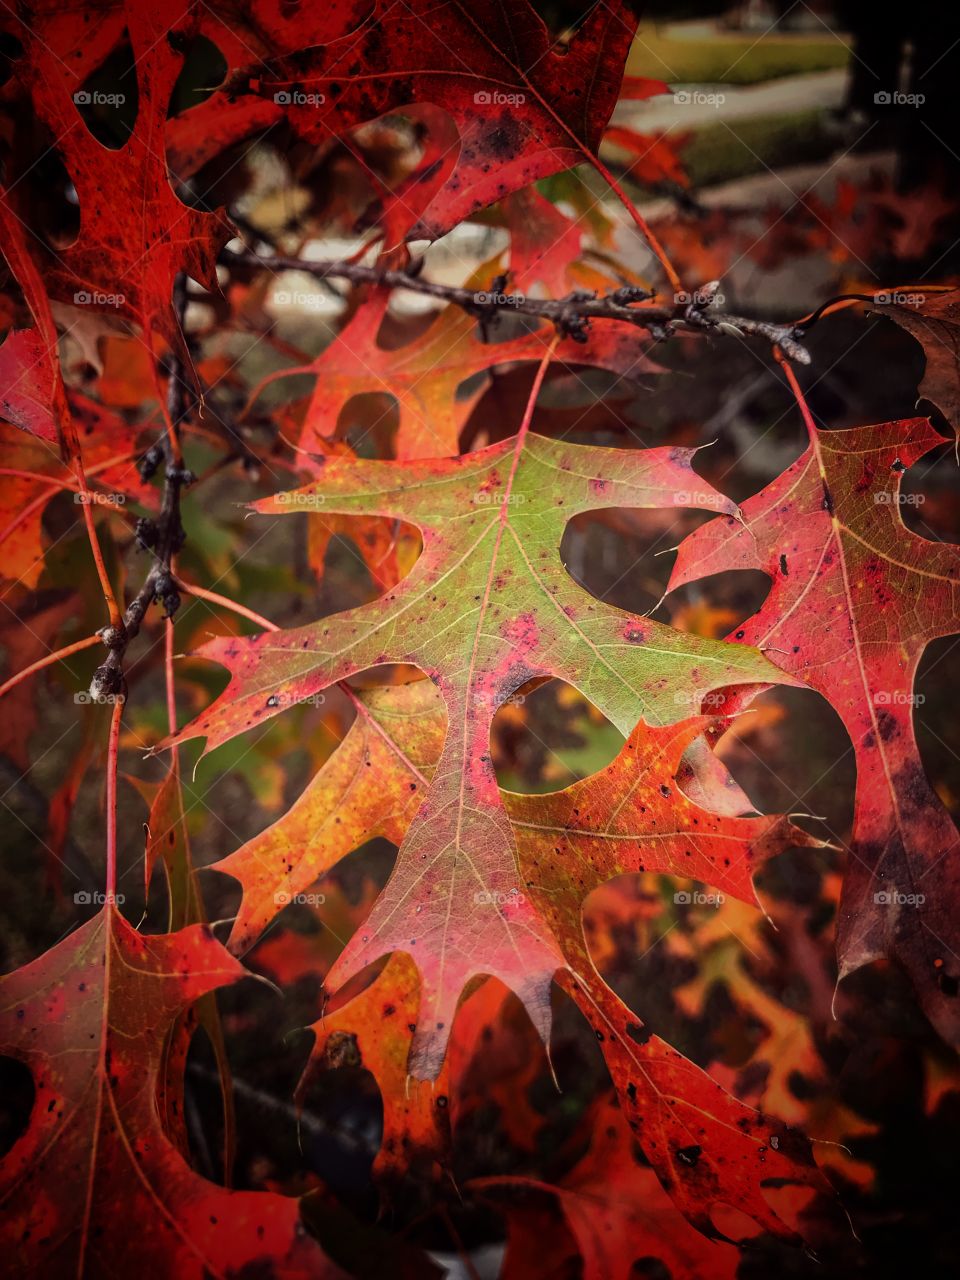 Fall in Texas - even though it is already December there are still oak trees with beautiful colors